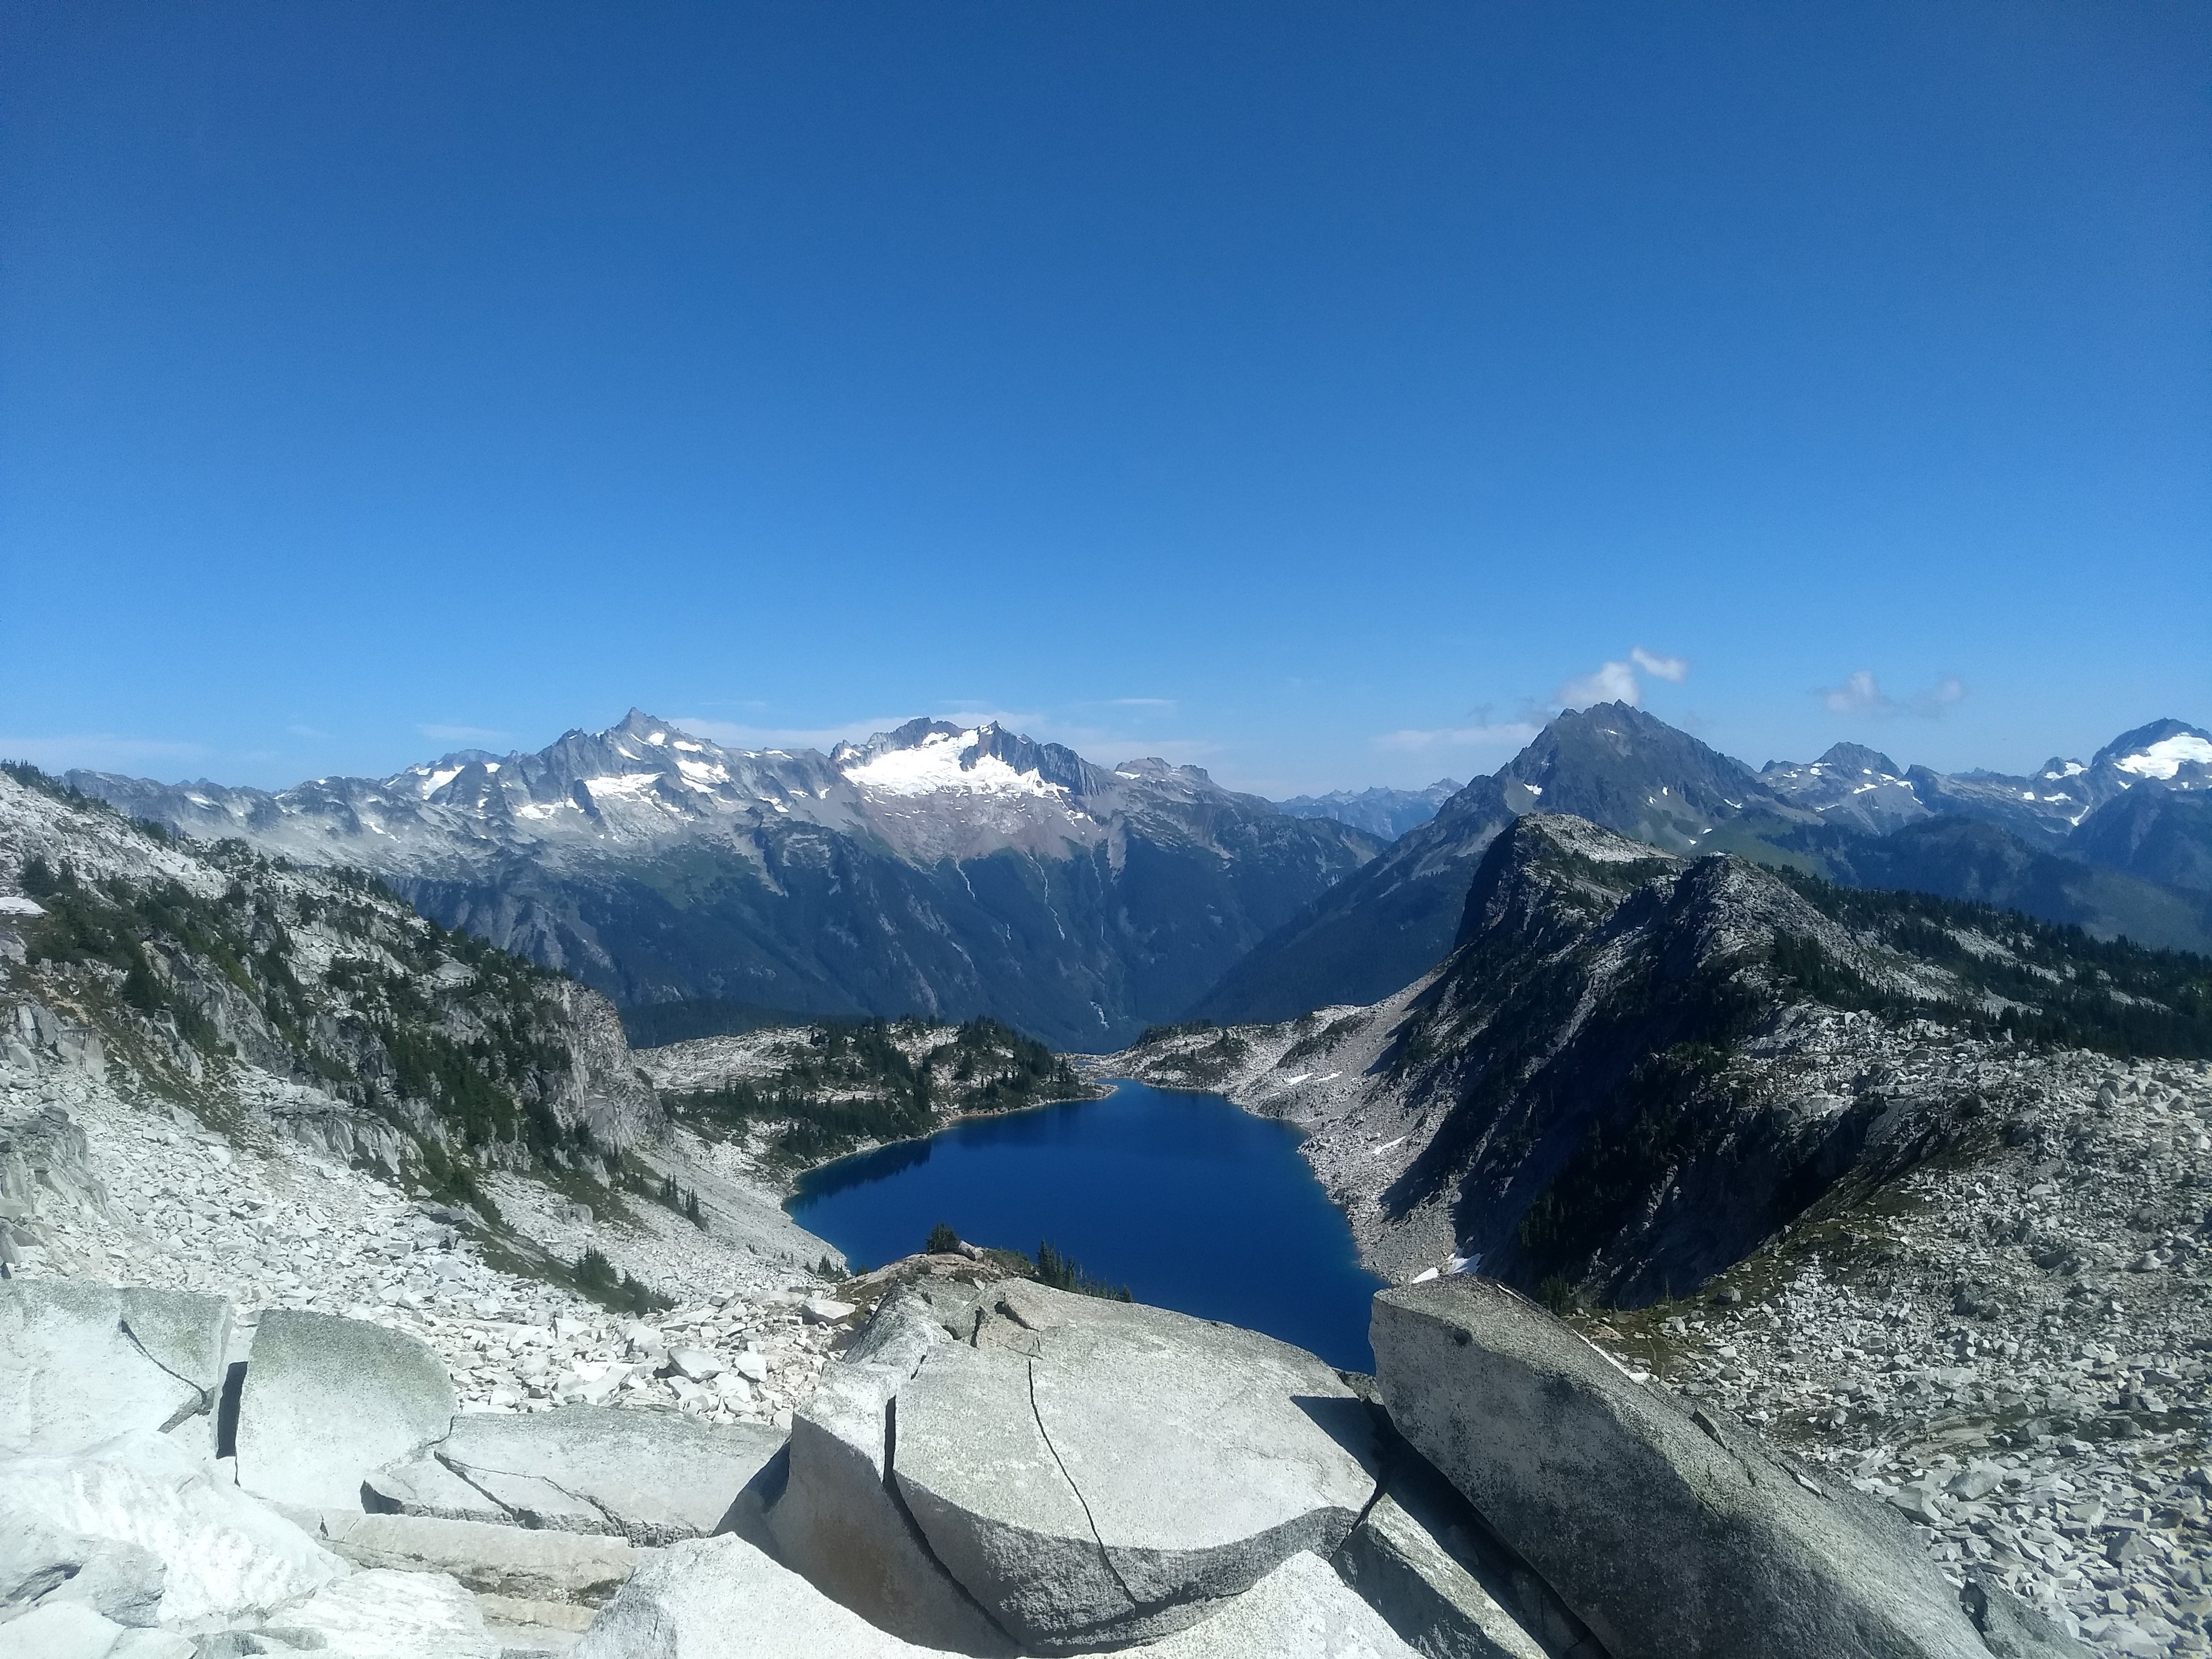 This is The view on the Hidden Lake trail - the lake.  I suggest doing this hike if you can!